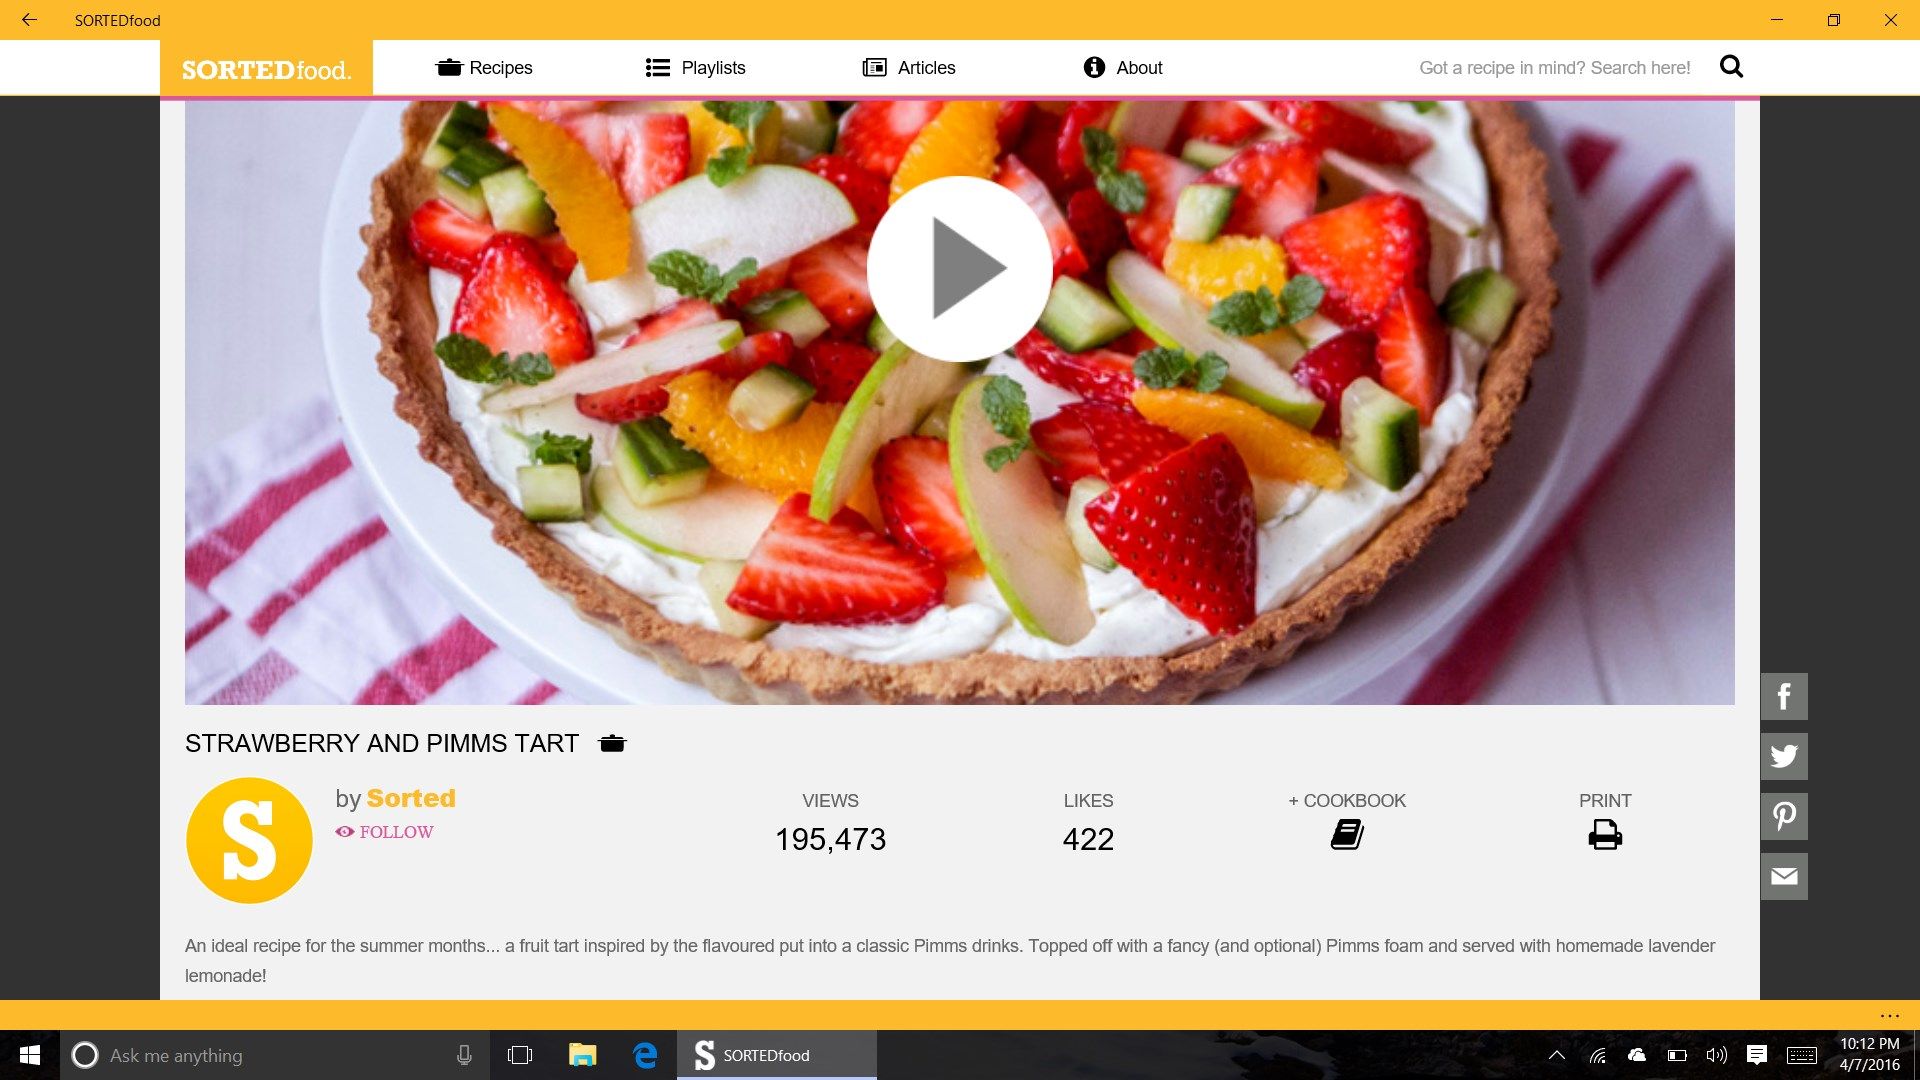 SORTED recipes are easy to follow, with videos and step-by-step photos for beginners.